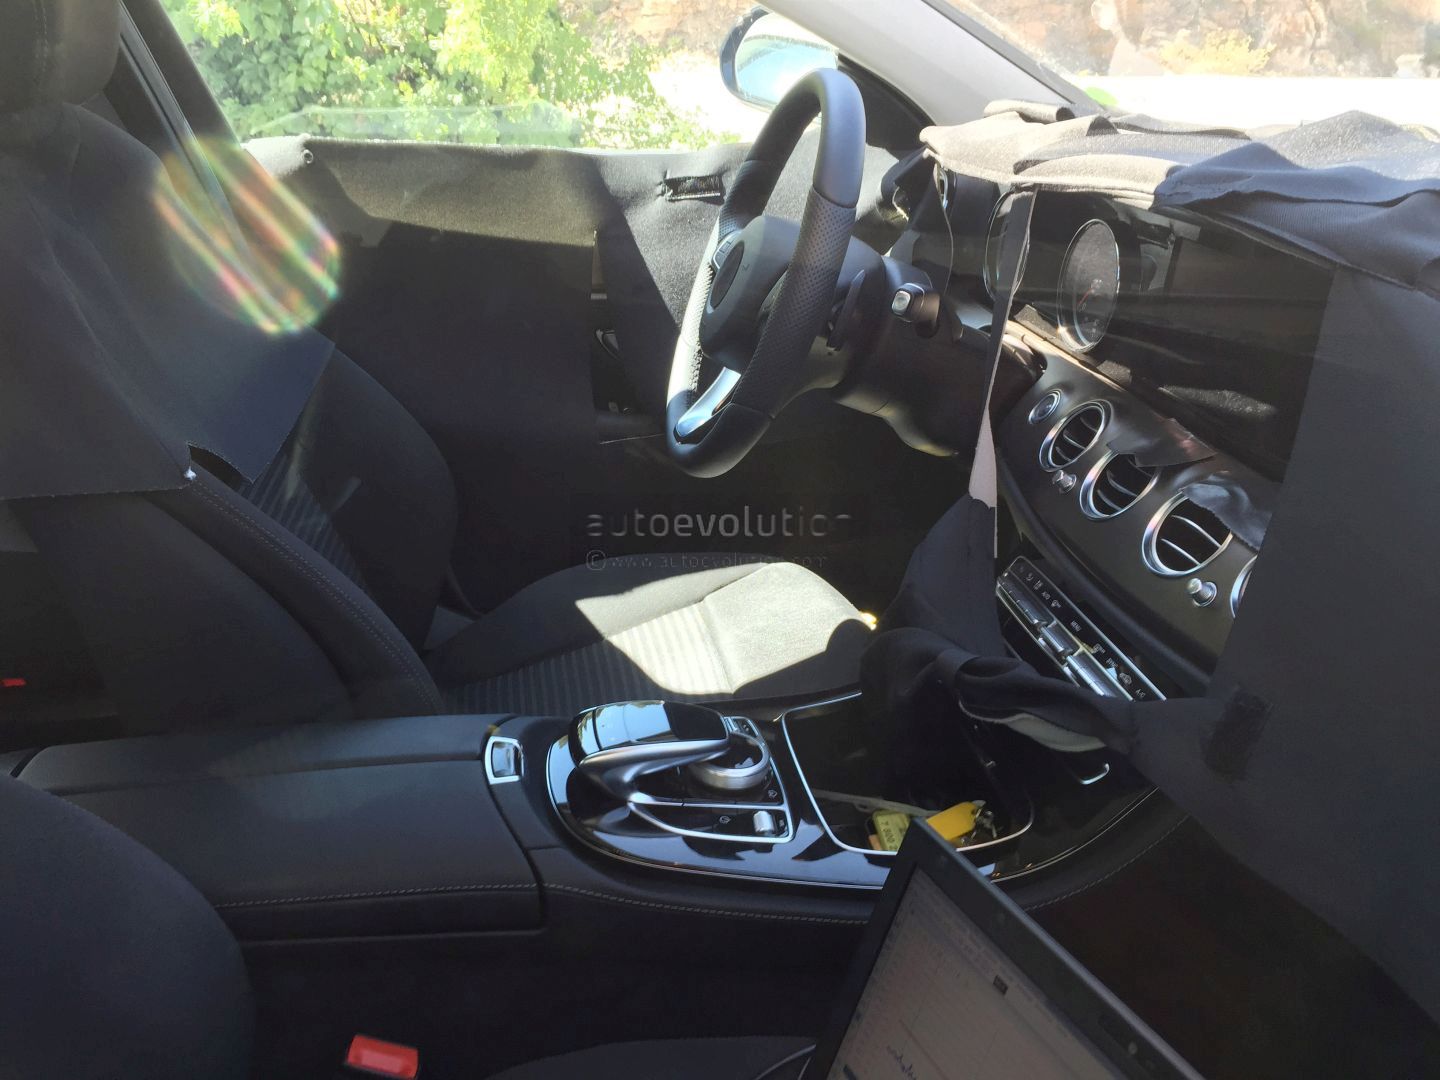 2017 Mercedes E Class Interior Partially Revealed In Latest